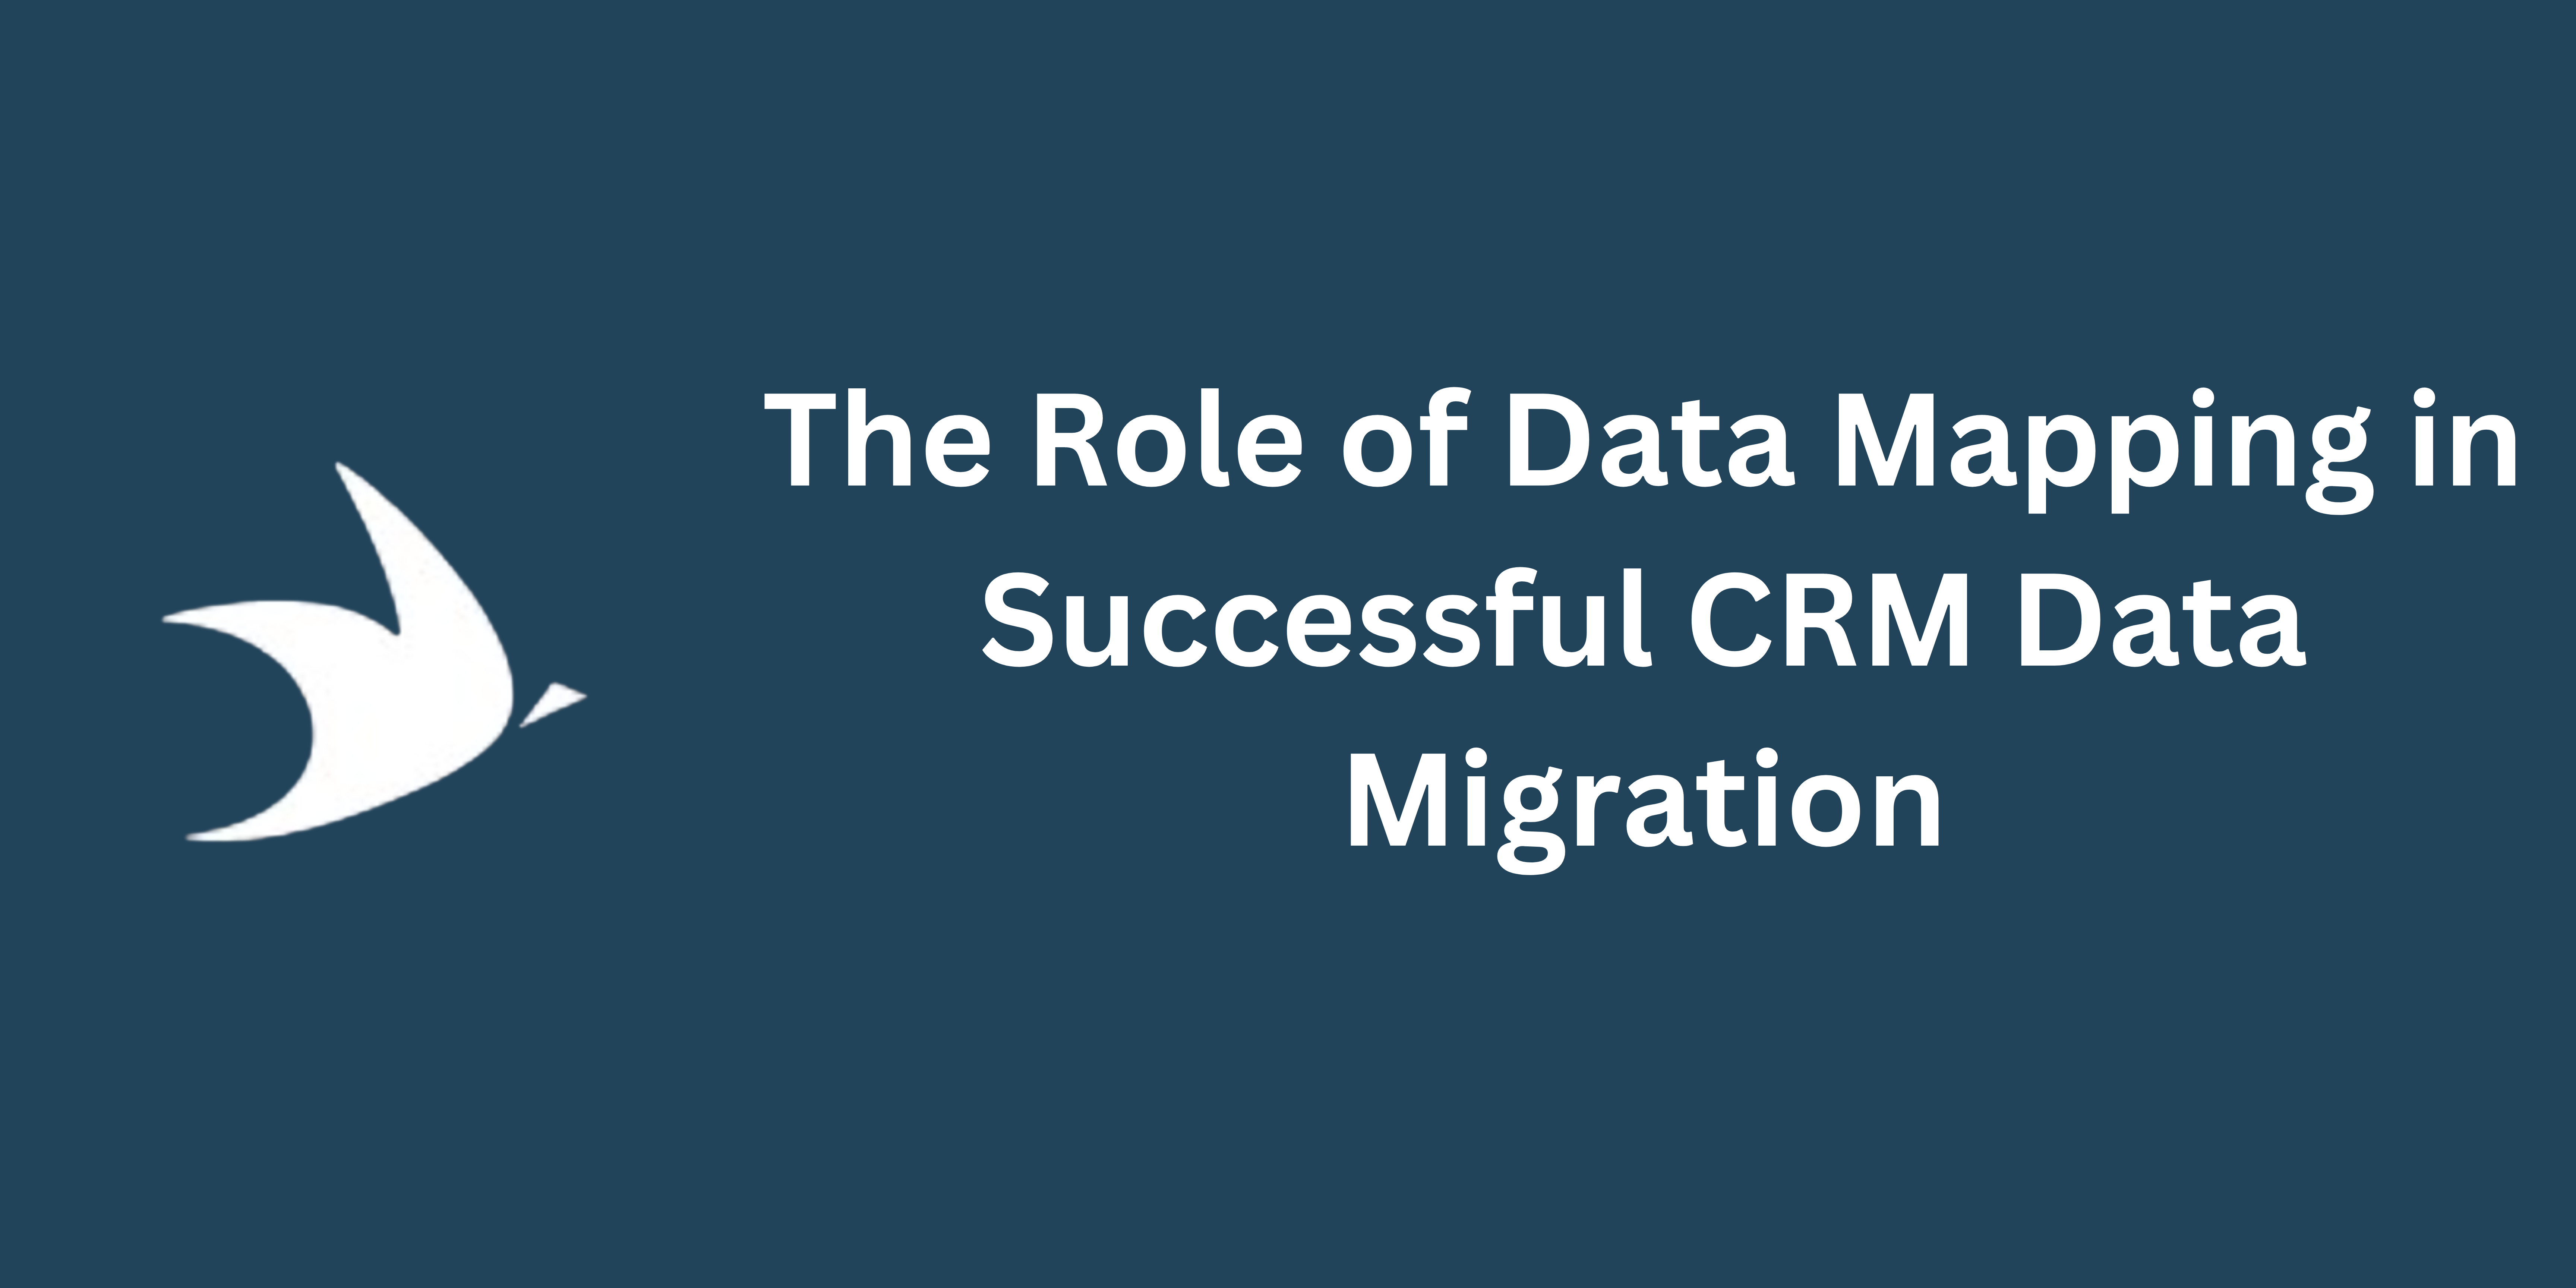 The Role of Data Mapping in Successful CRM Data Migration